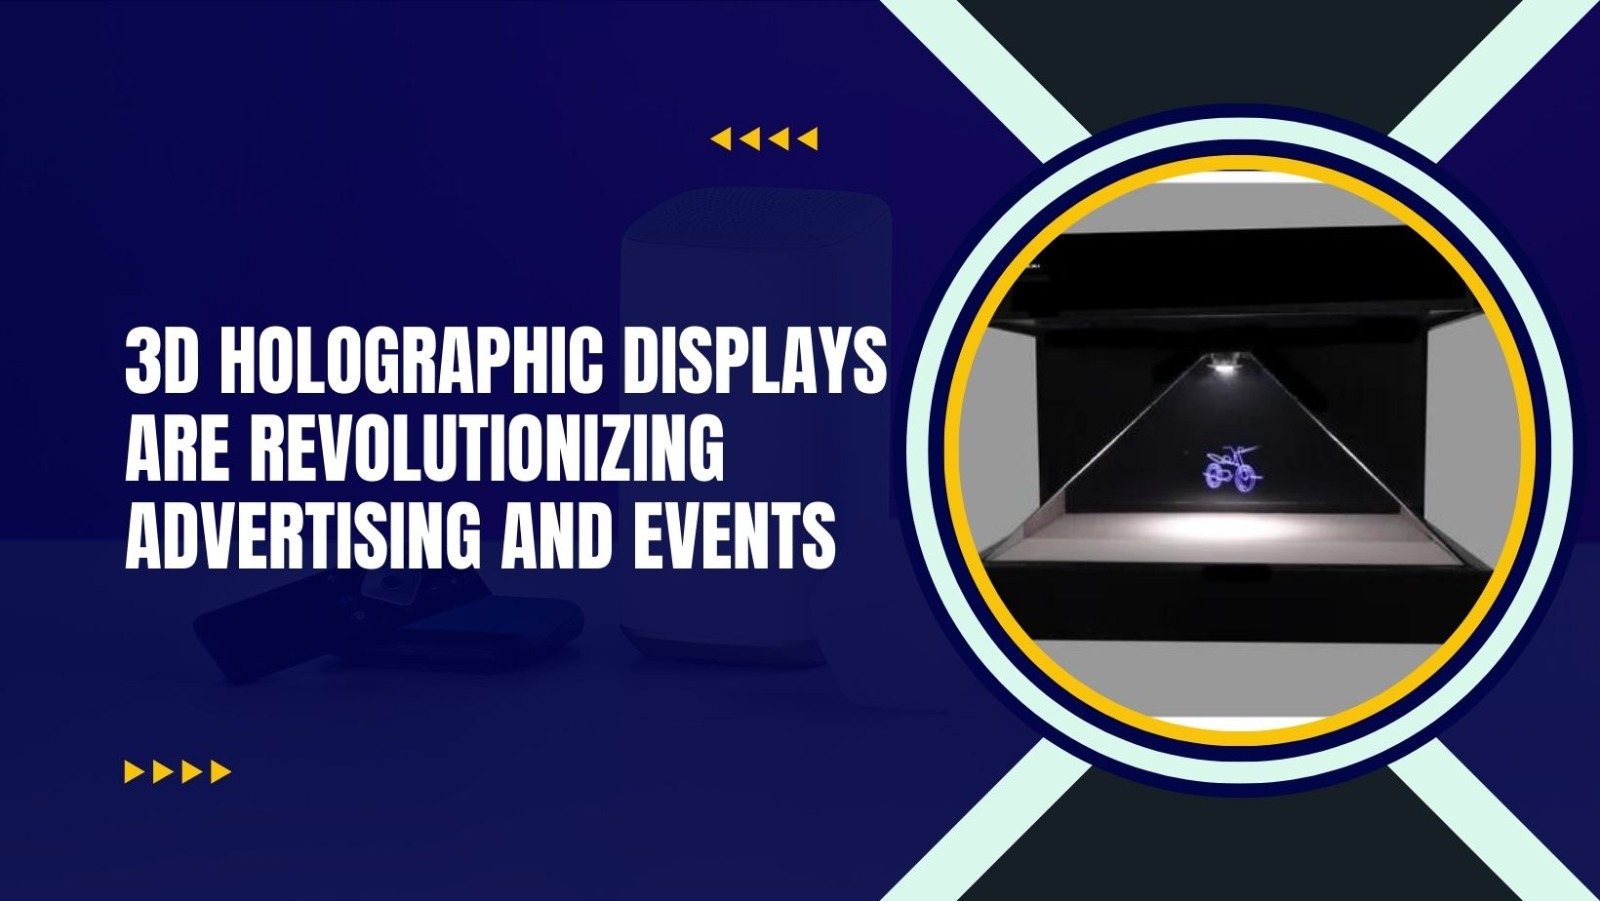 3D Holographic Displays Are Revolutionizing Advertising and Events